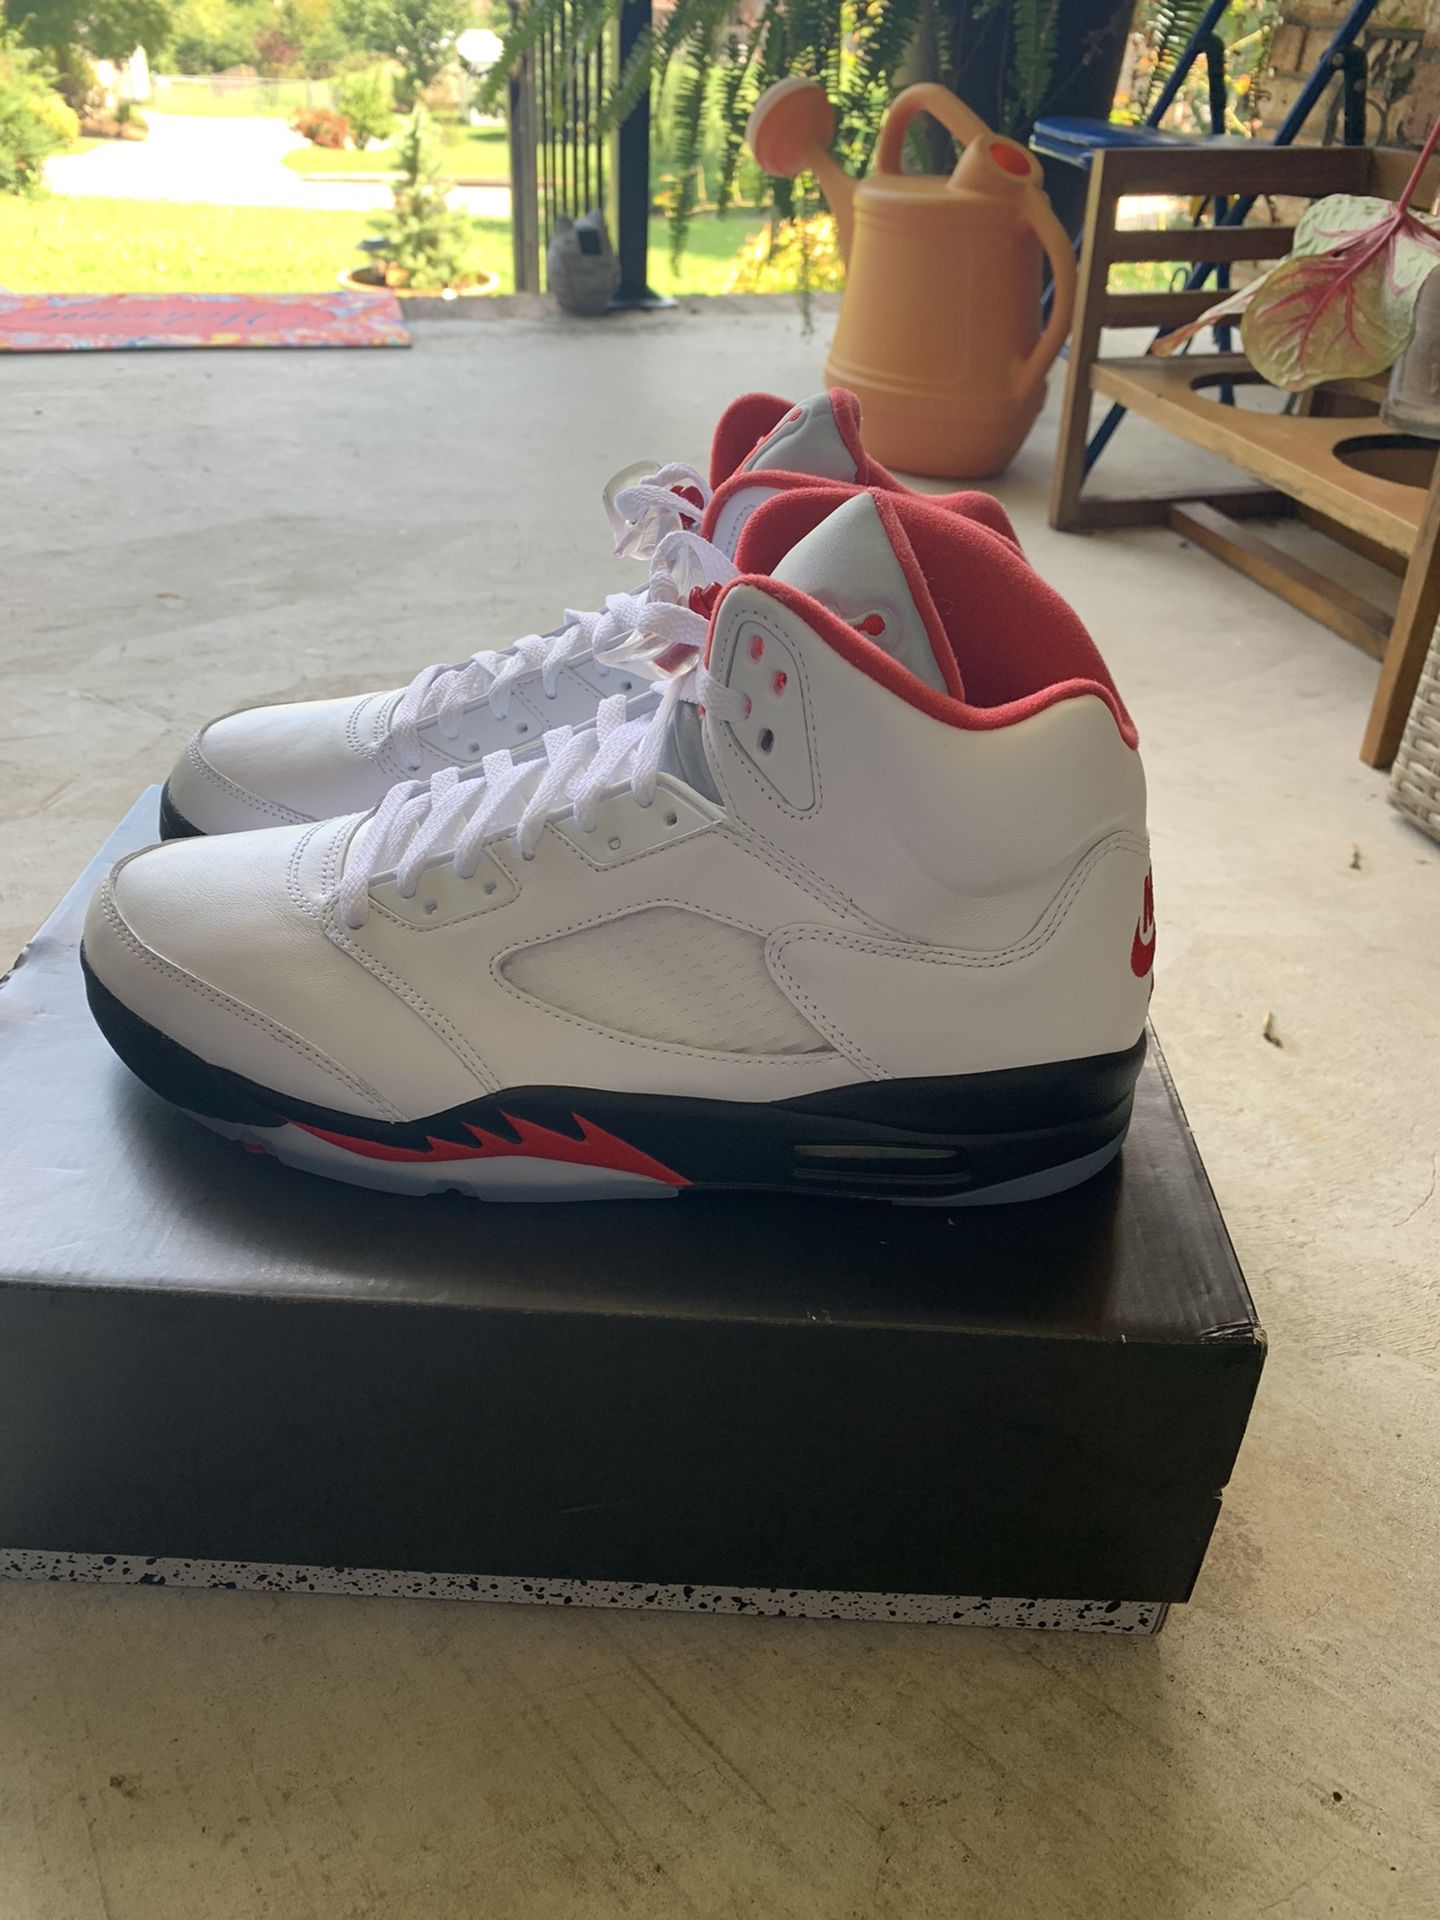 Fire red 5s